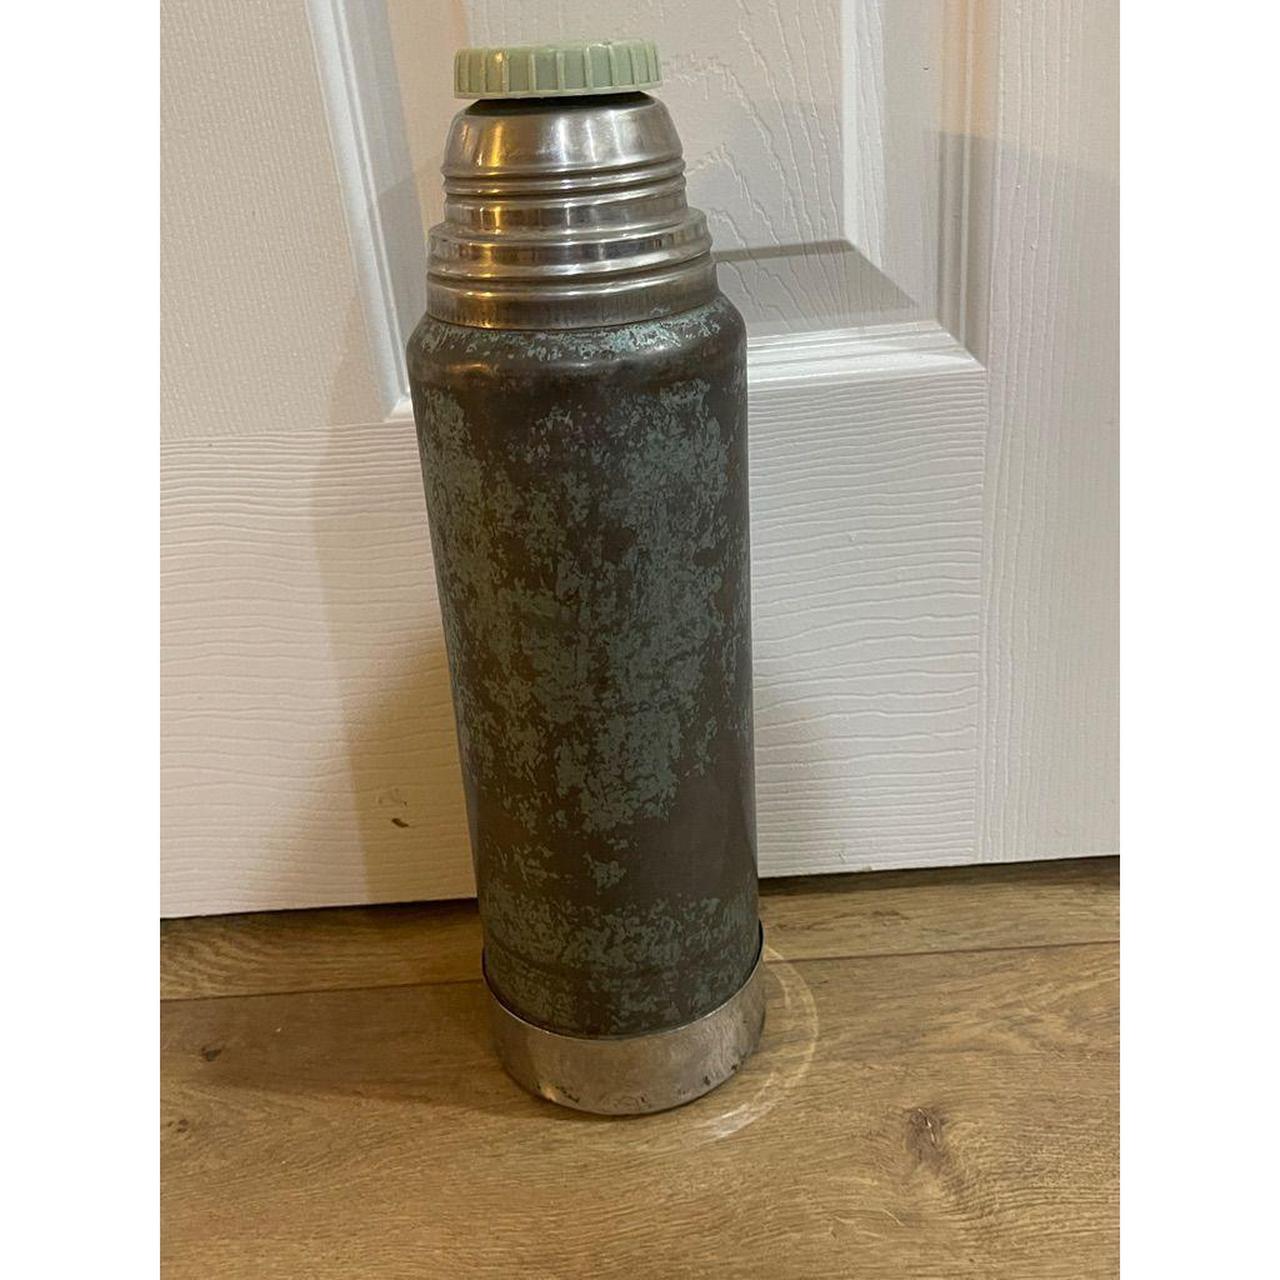 Thermos, Aladdin / Stanley Wide Mouth, Hammertone Green, Vintage 1995